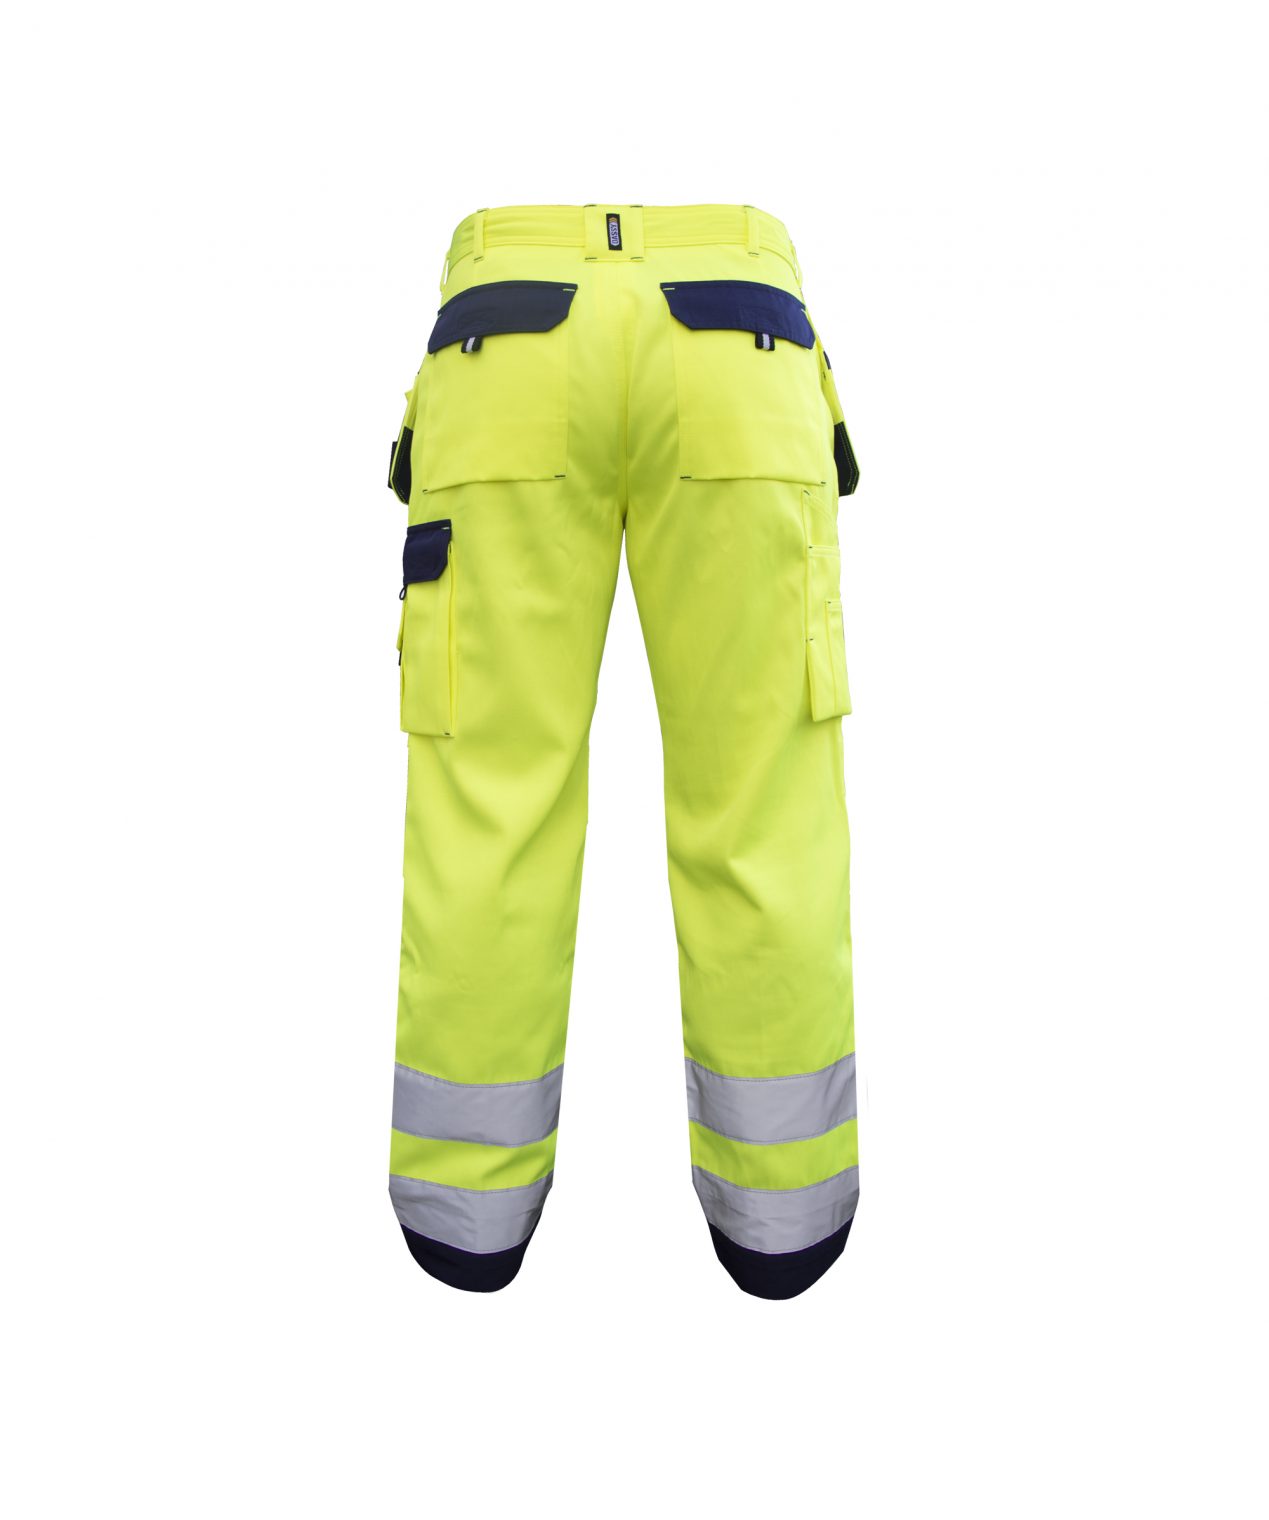 glasgow high visibility trousers with holster pockets and knee pockets fluo yellow navy back